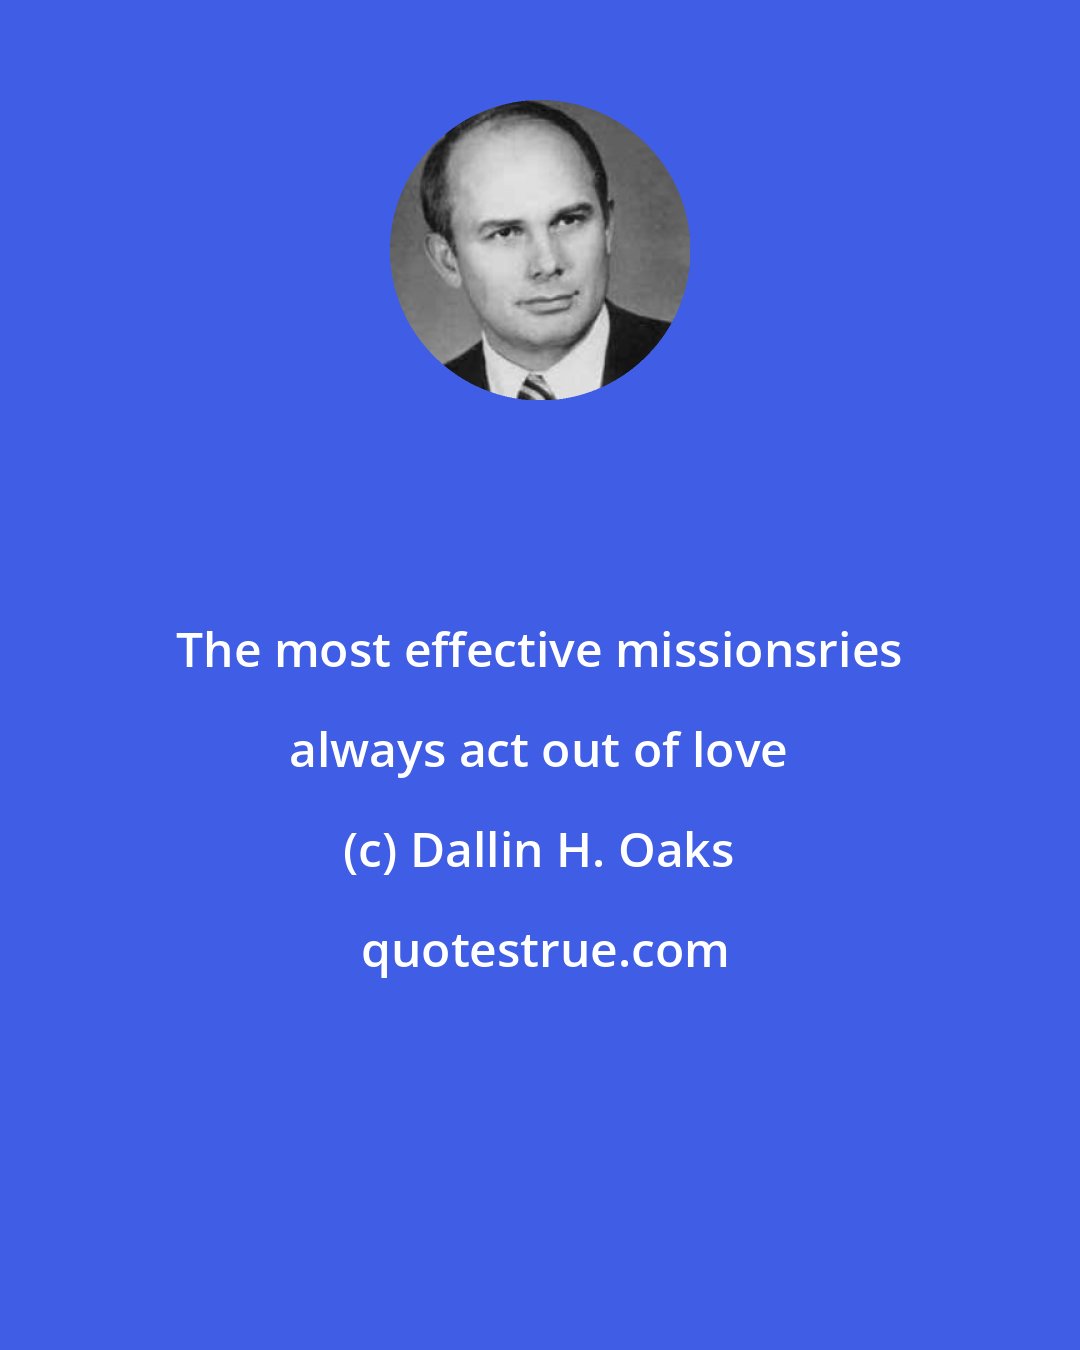 Dallin H. Oaks: The most effective missionsries always act out of love